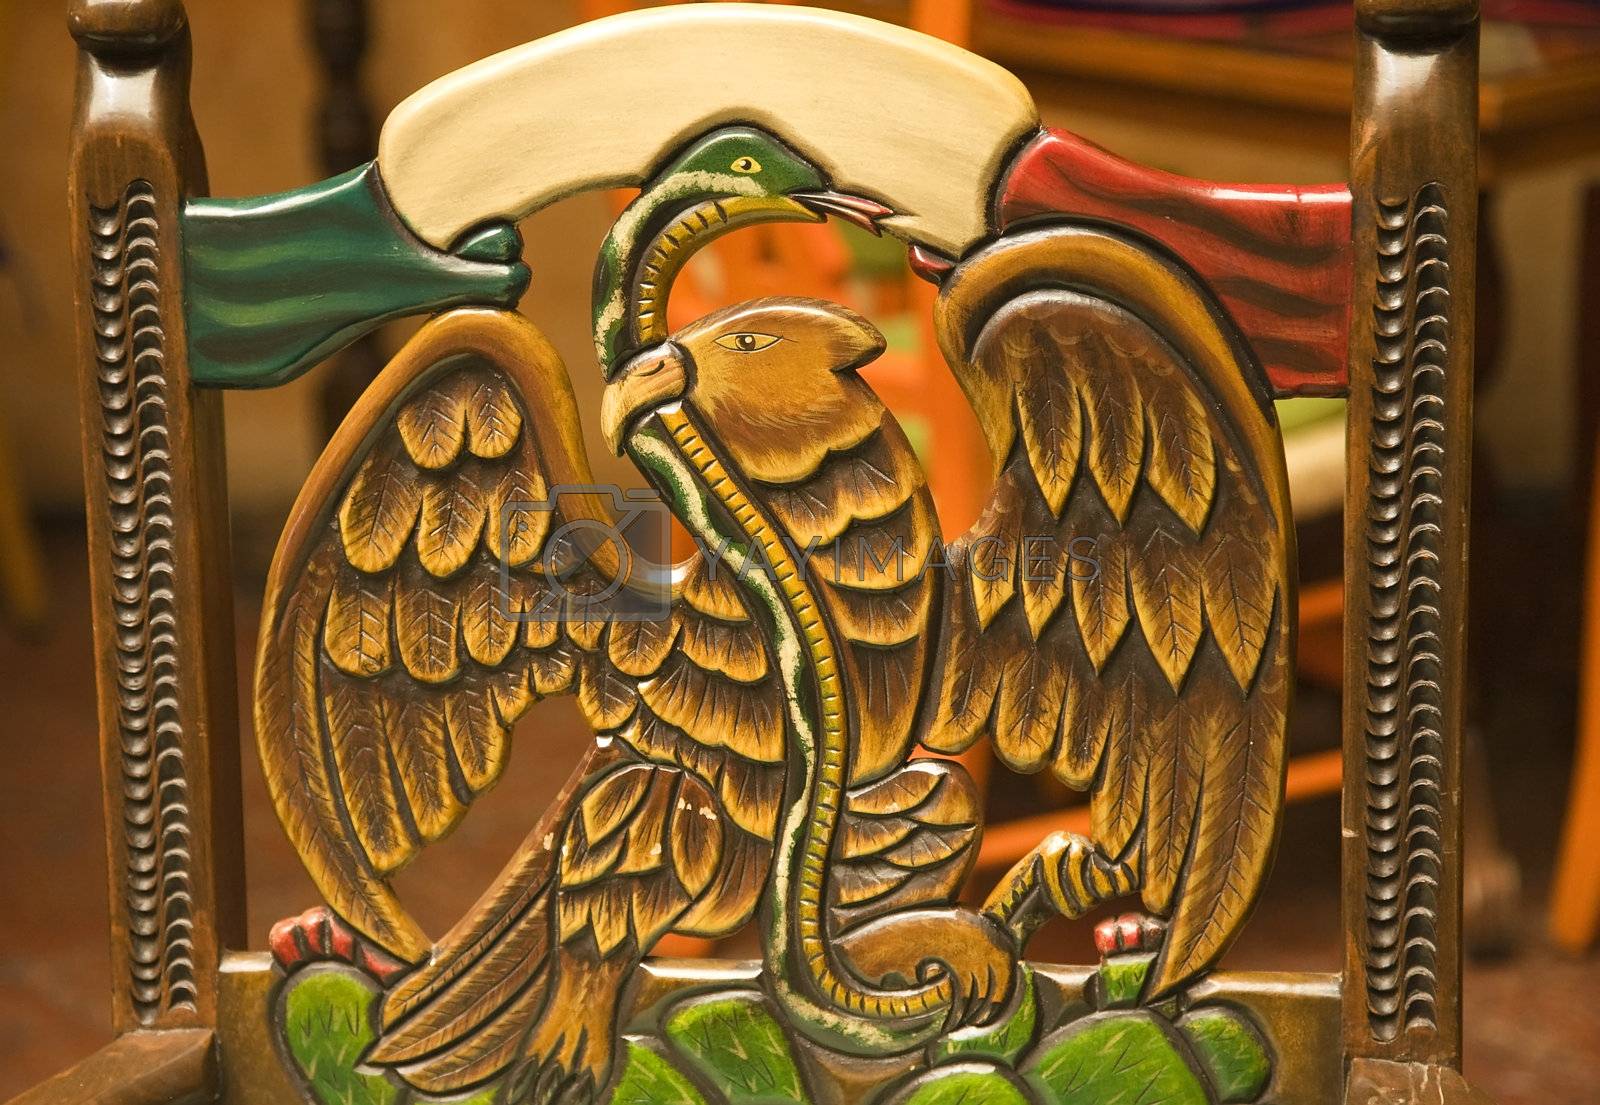 Royalty free image of Wooden Carved Chair Symbol of Mexico Eagle Holding Snake by bill_perry